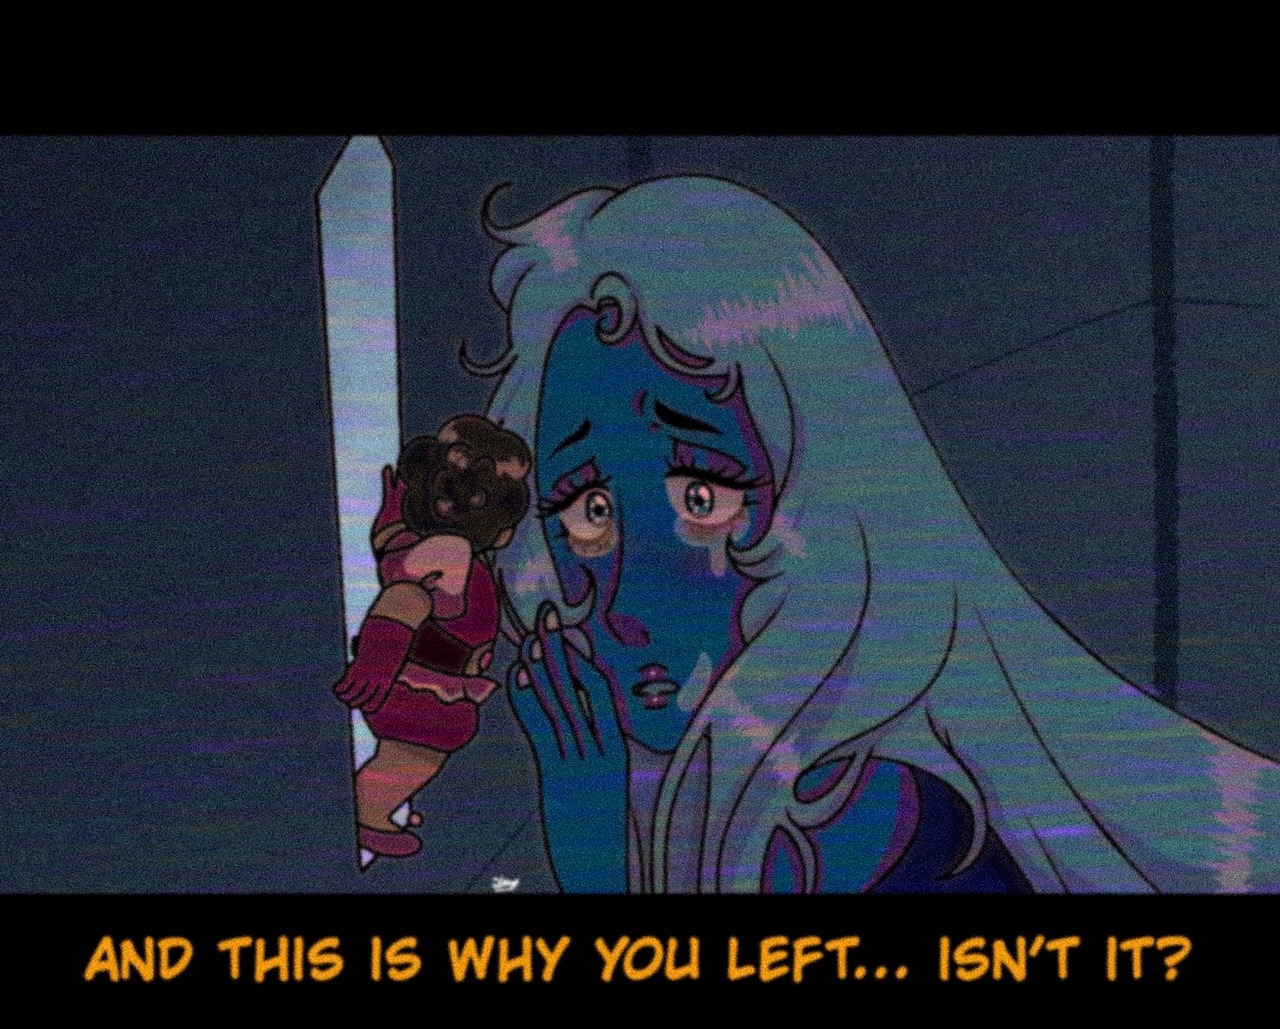 And this is why you left... isn’t it?
Heres another fake 80’s/90’s anime screenshot redraw of one of my favorite scenes.